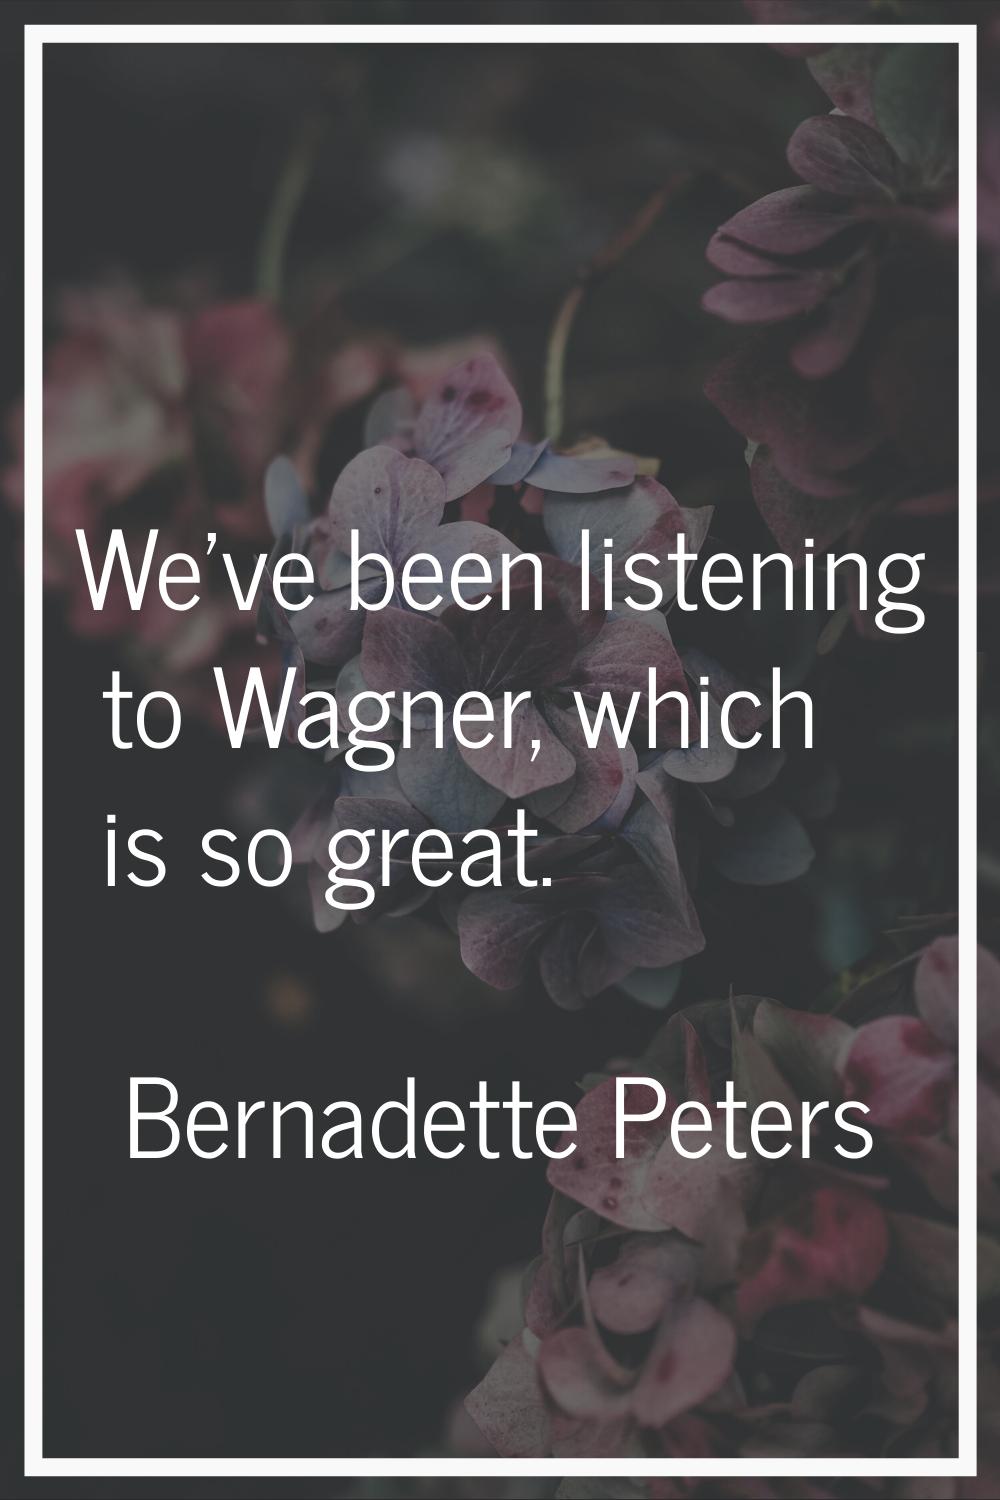 We've been listening to Wagner, which is so great.